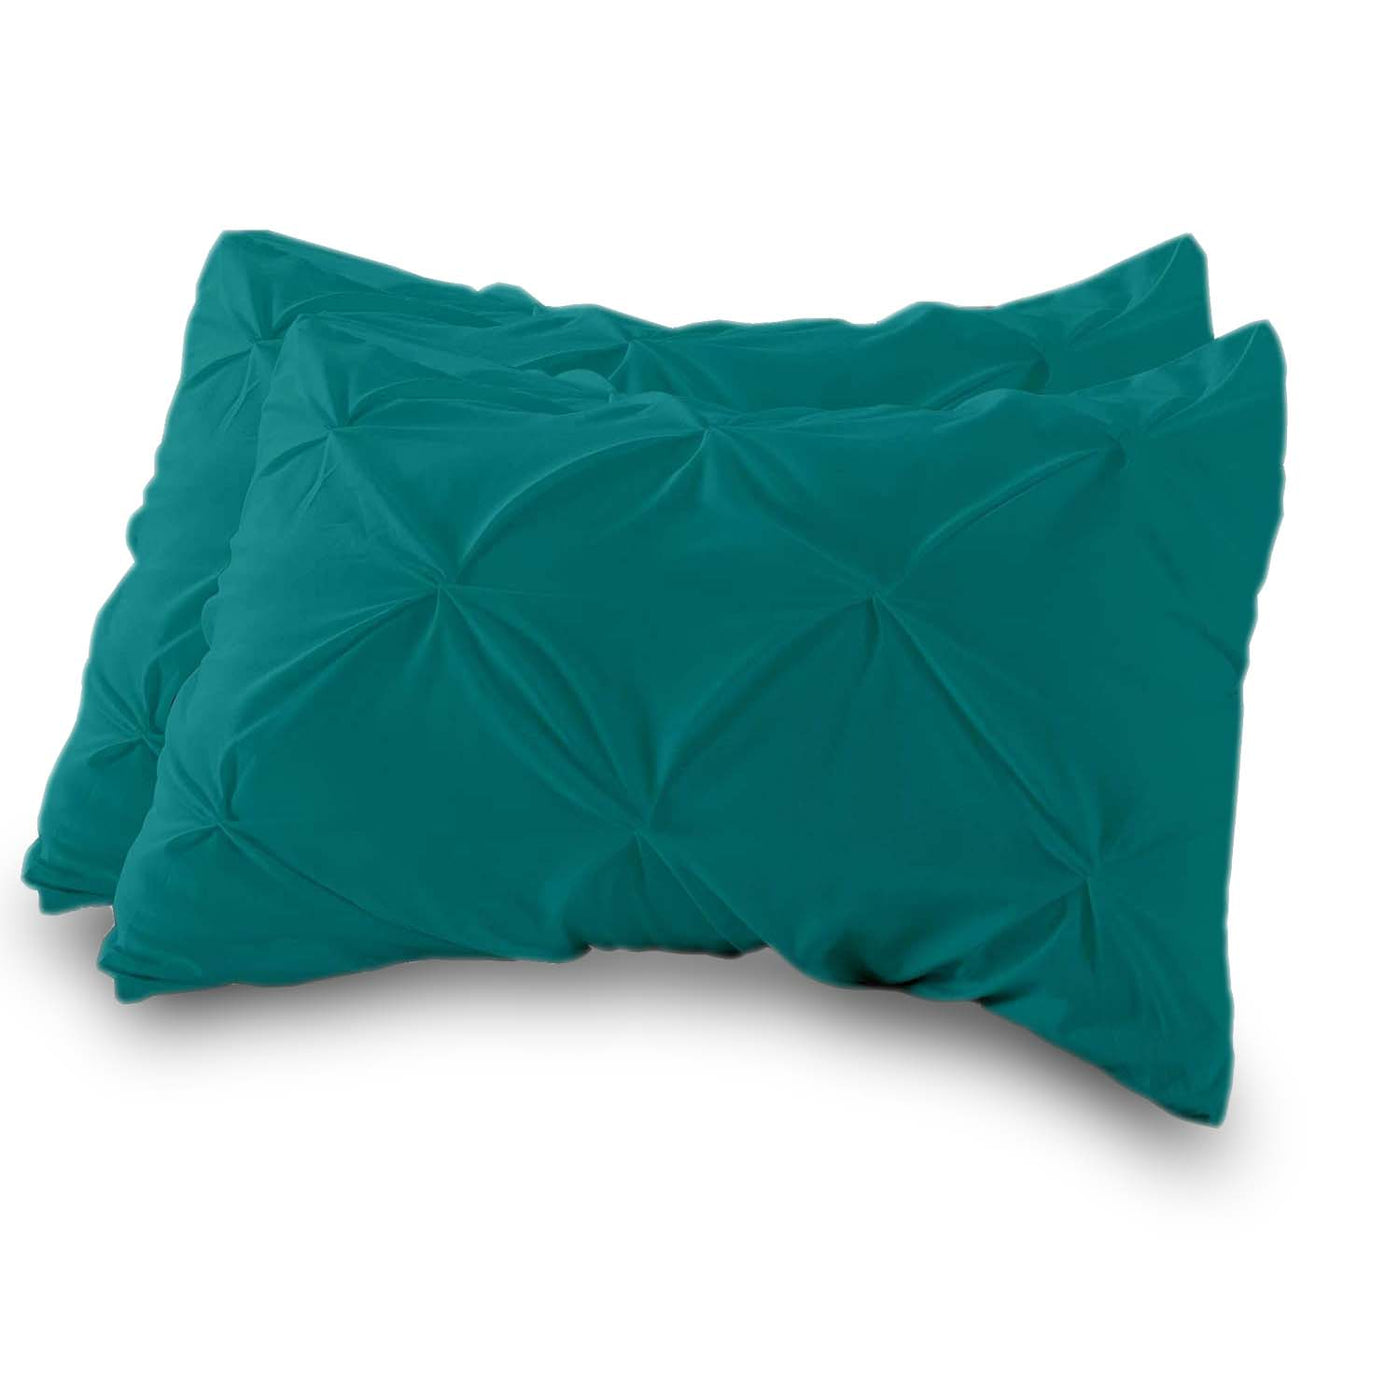 Set Of 2 - 300 TC Egyptian Cotton Pinch Pleated Pillow Covers - Teal